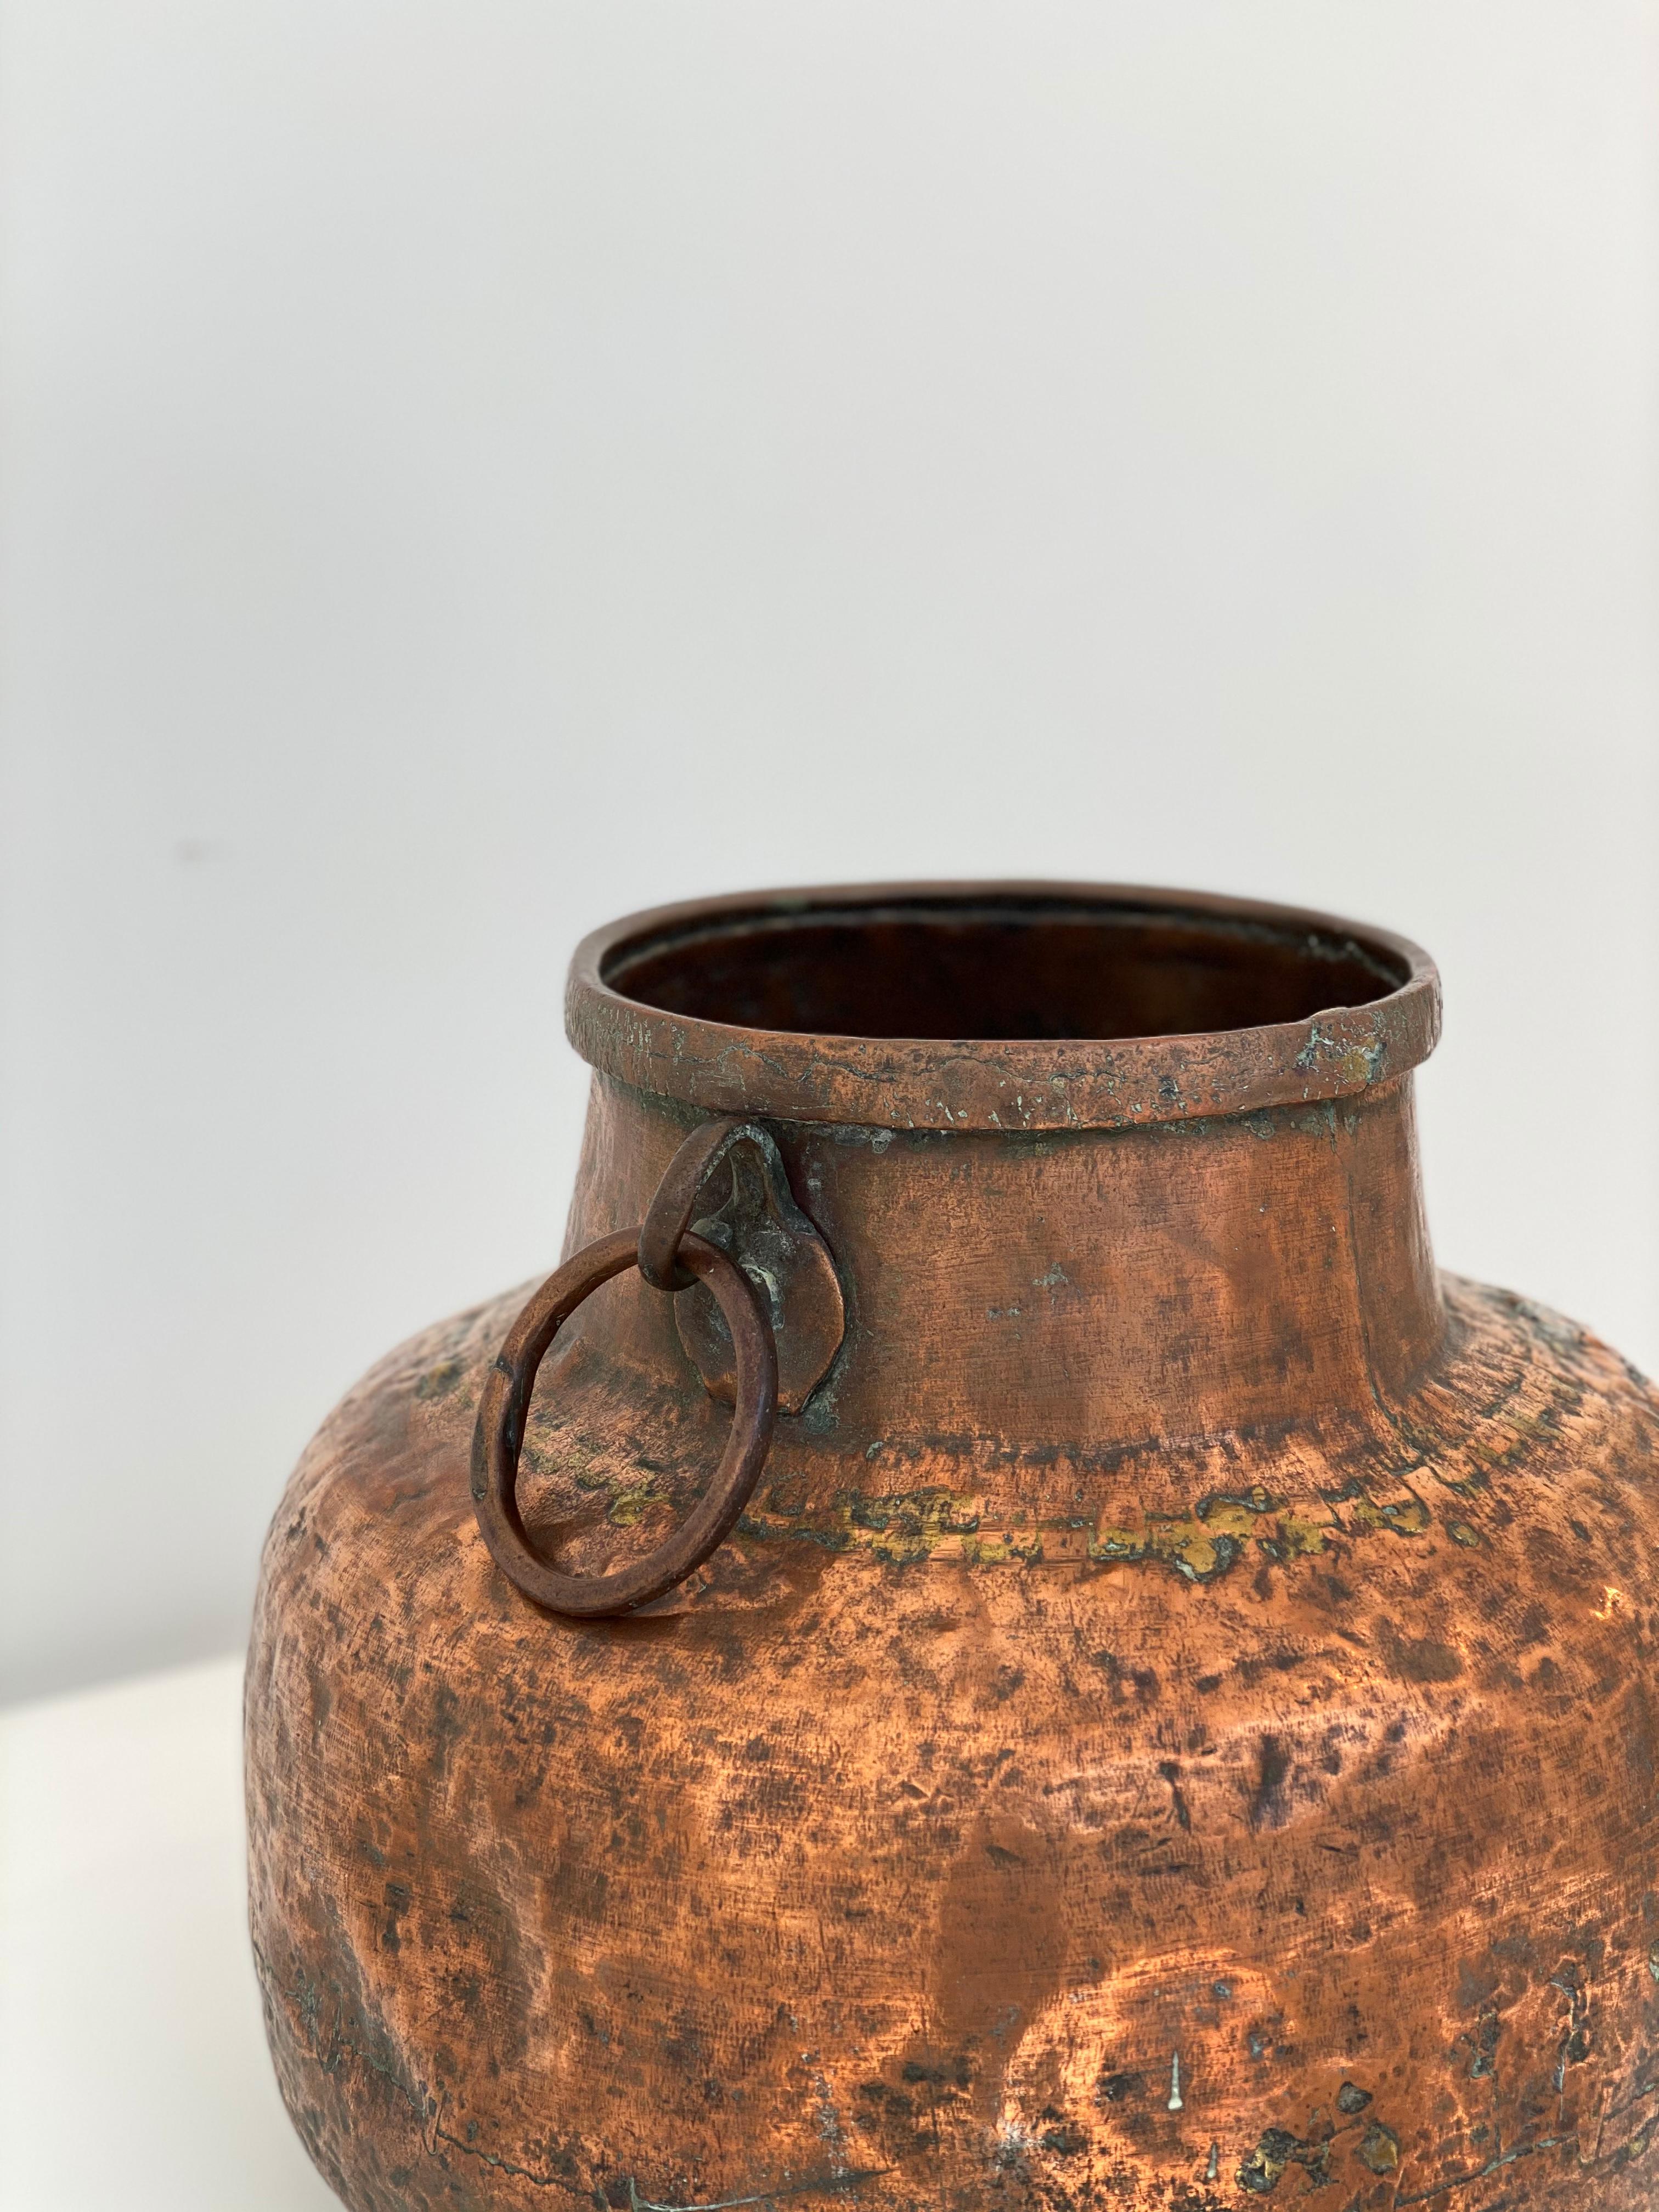 Ottoman Hammered Copper Vessel, 18th Century For Sale 4